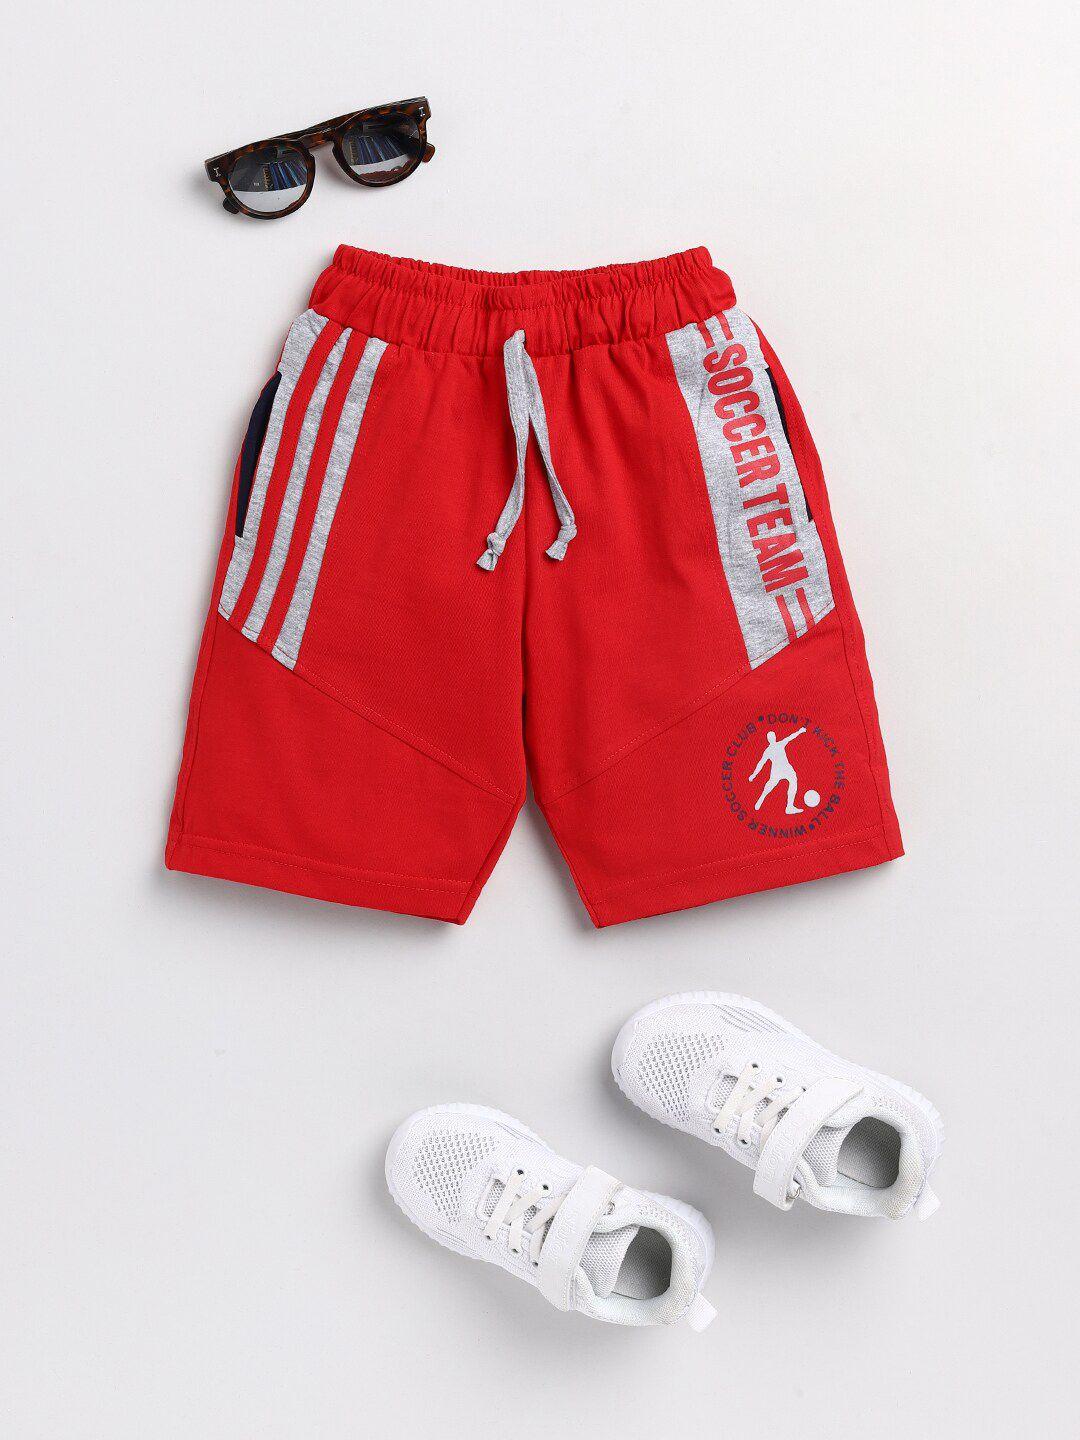 todd n teen boys red typography printed cotton shorts